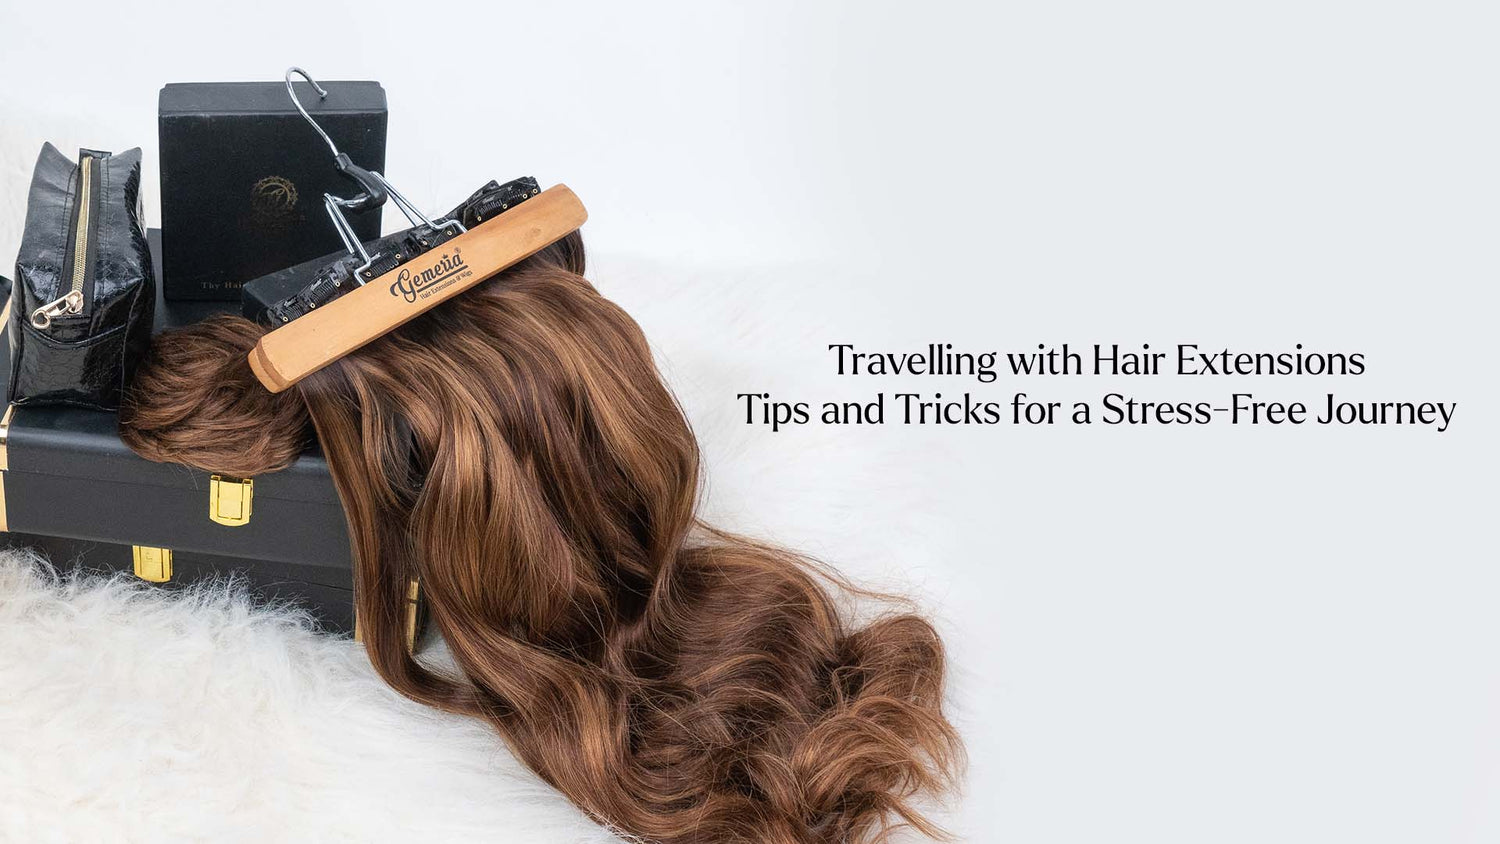 Travelling with Hair Extensions: Tips and Tricks for a Stress-Free Journey